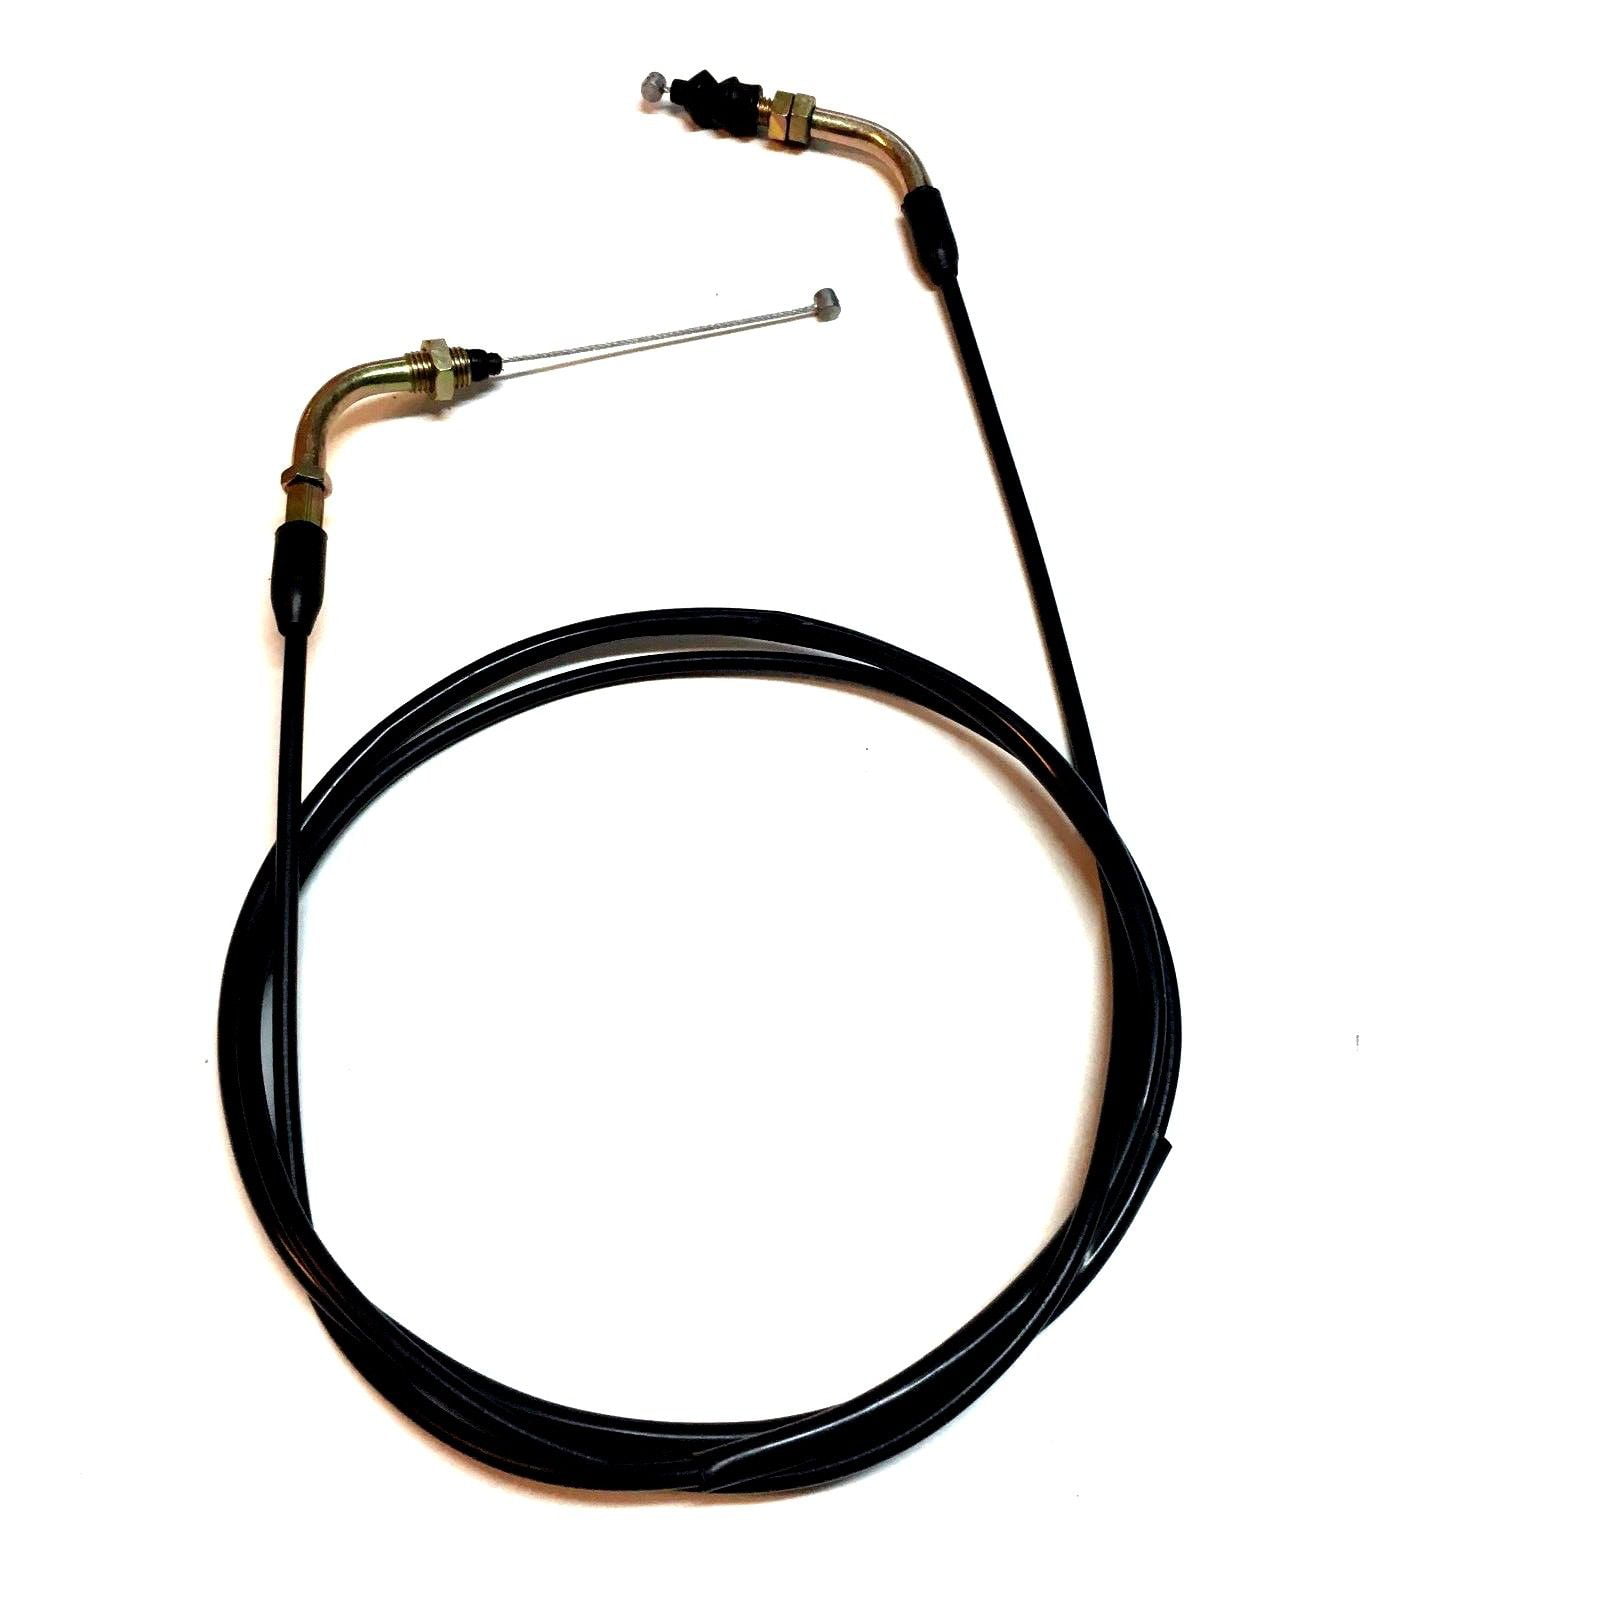 NEW 70 INCH THROTTLE CABLE 2 STROKE SCOOTER FUEL LINE 43cc 49cc MOPED 